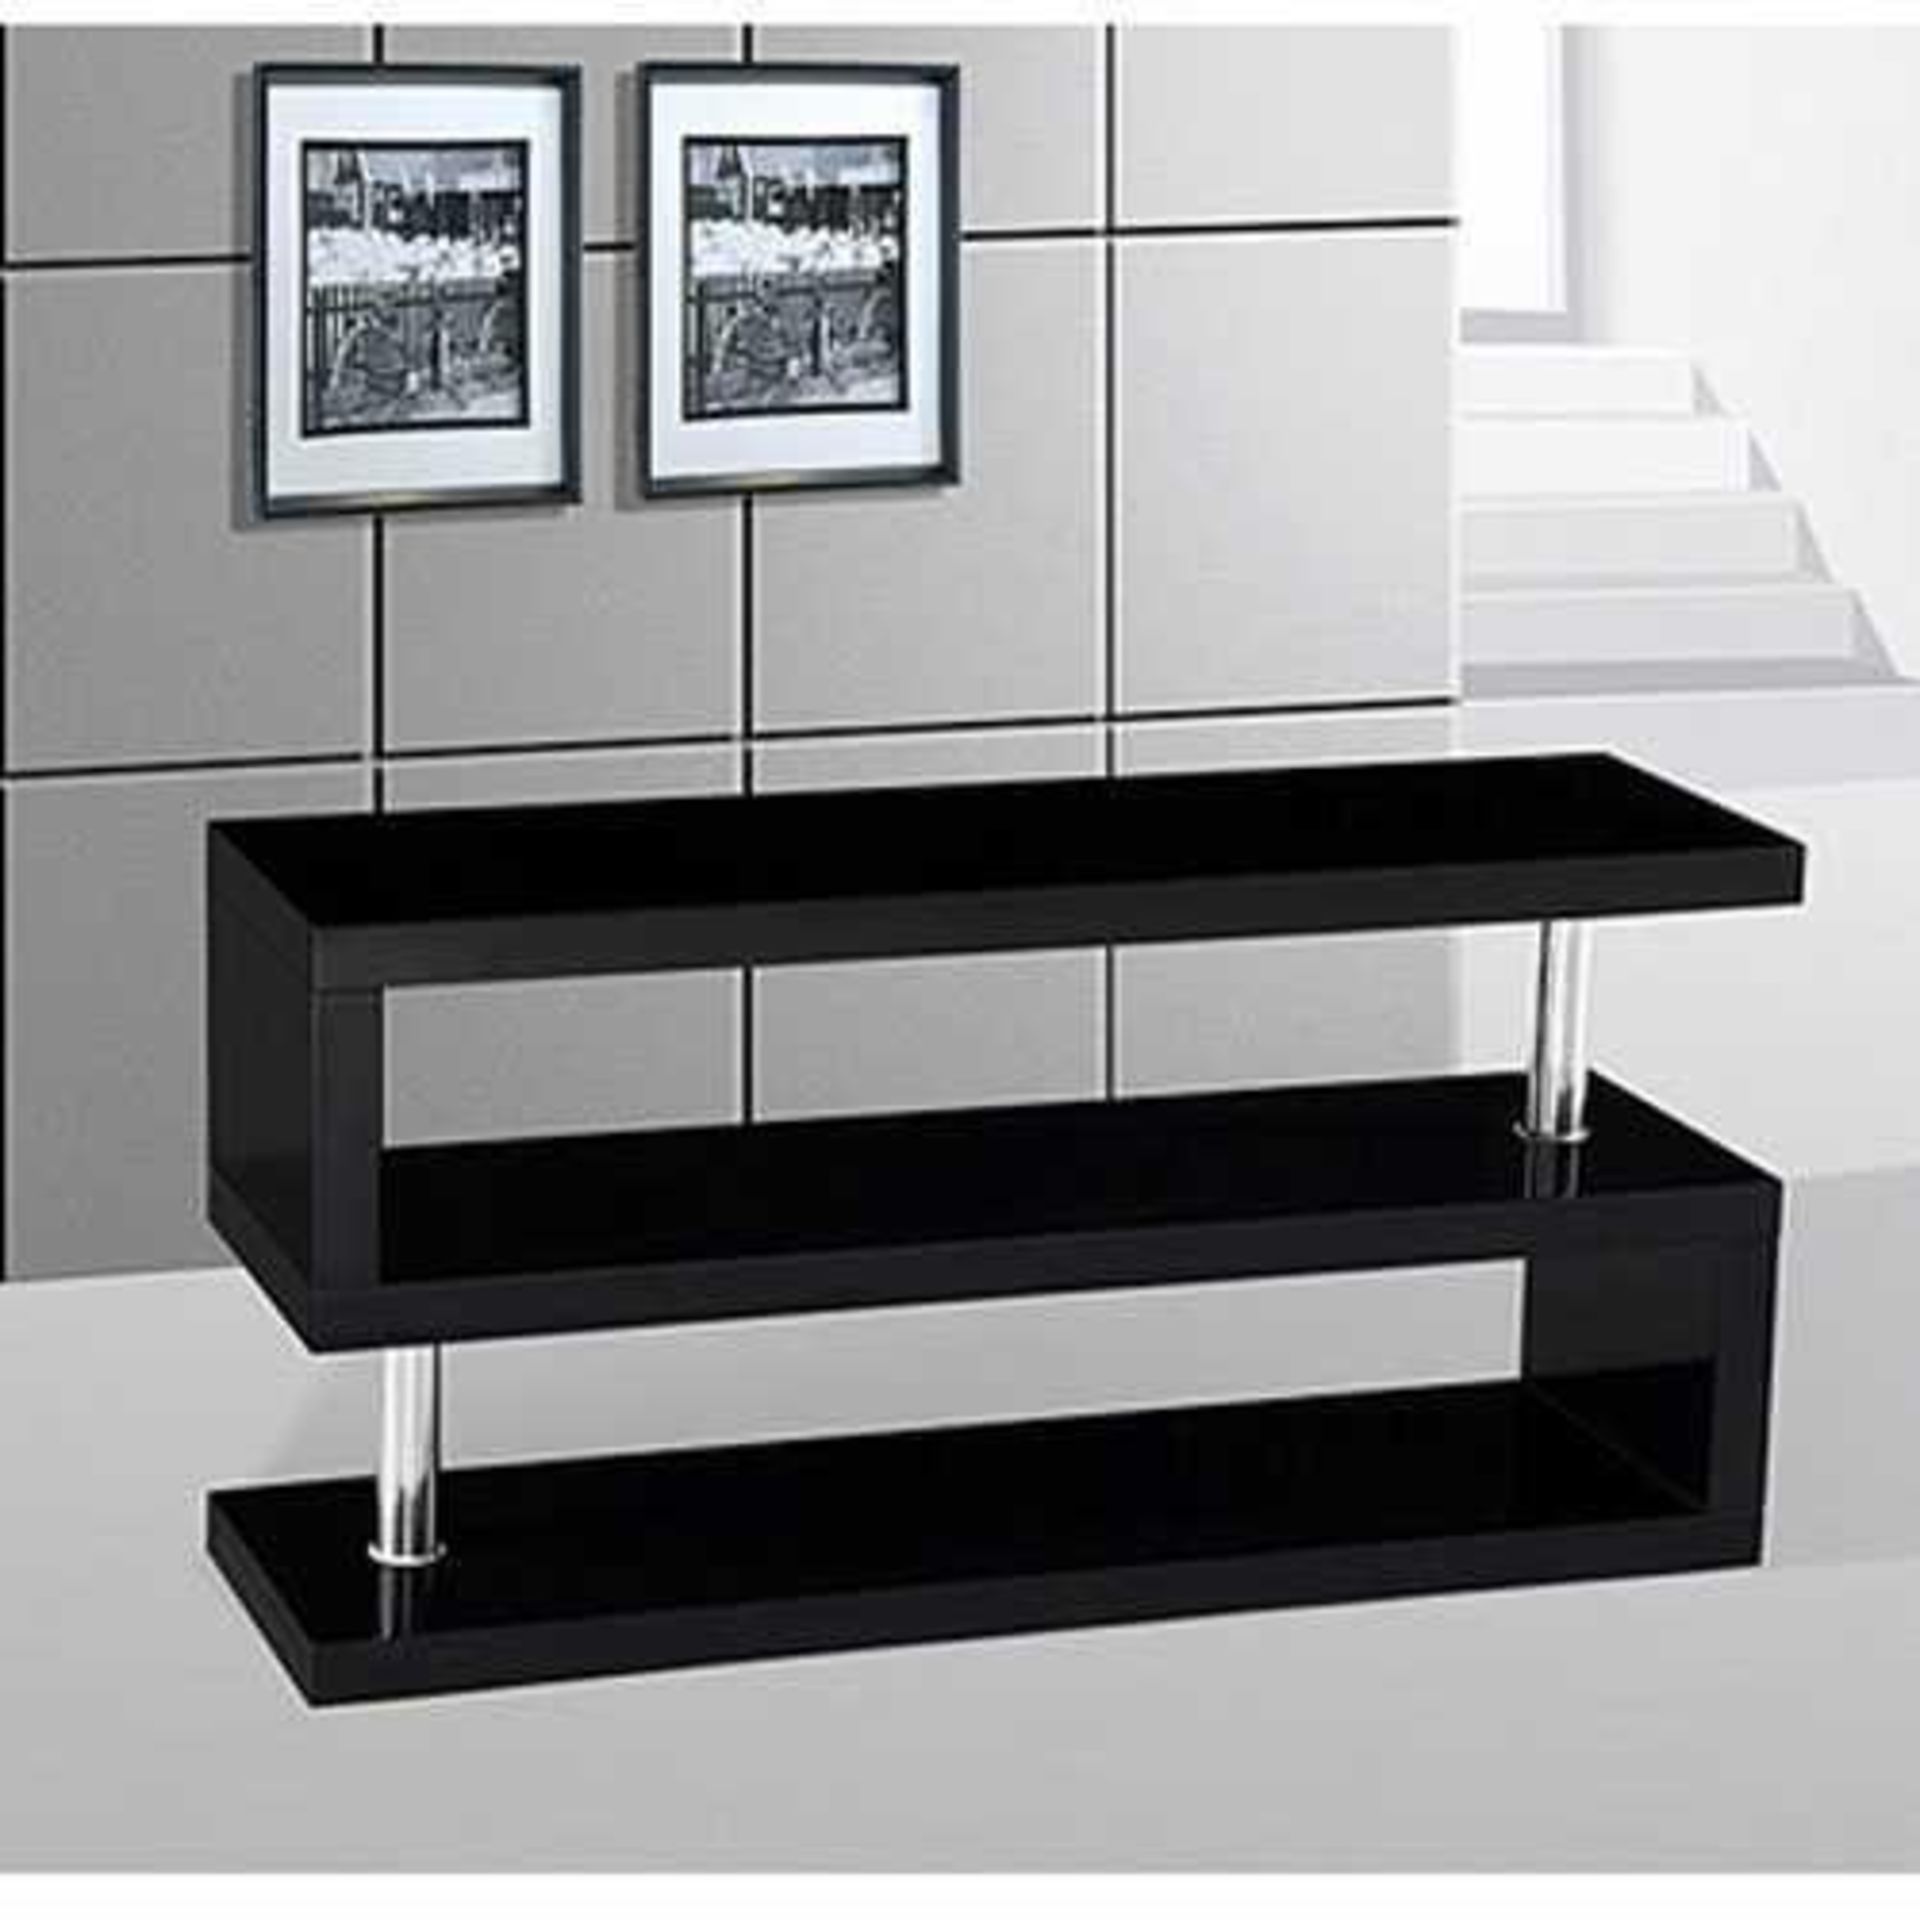 (Jb) RRP £200 Lot To Contain 1 Boxed Miami S Shaped Tv Stand